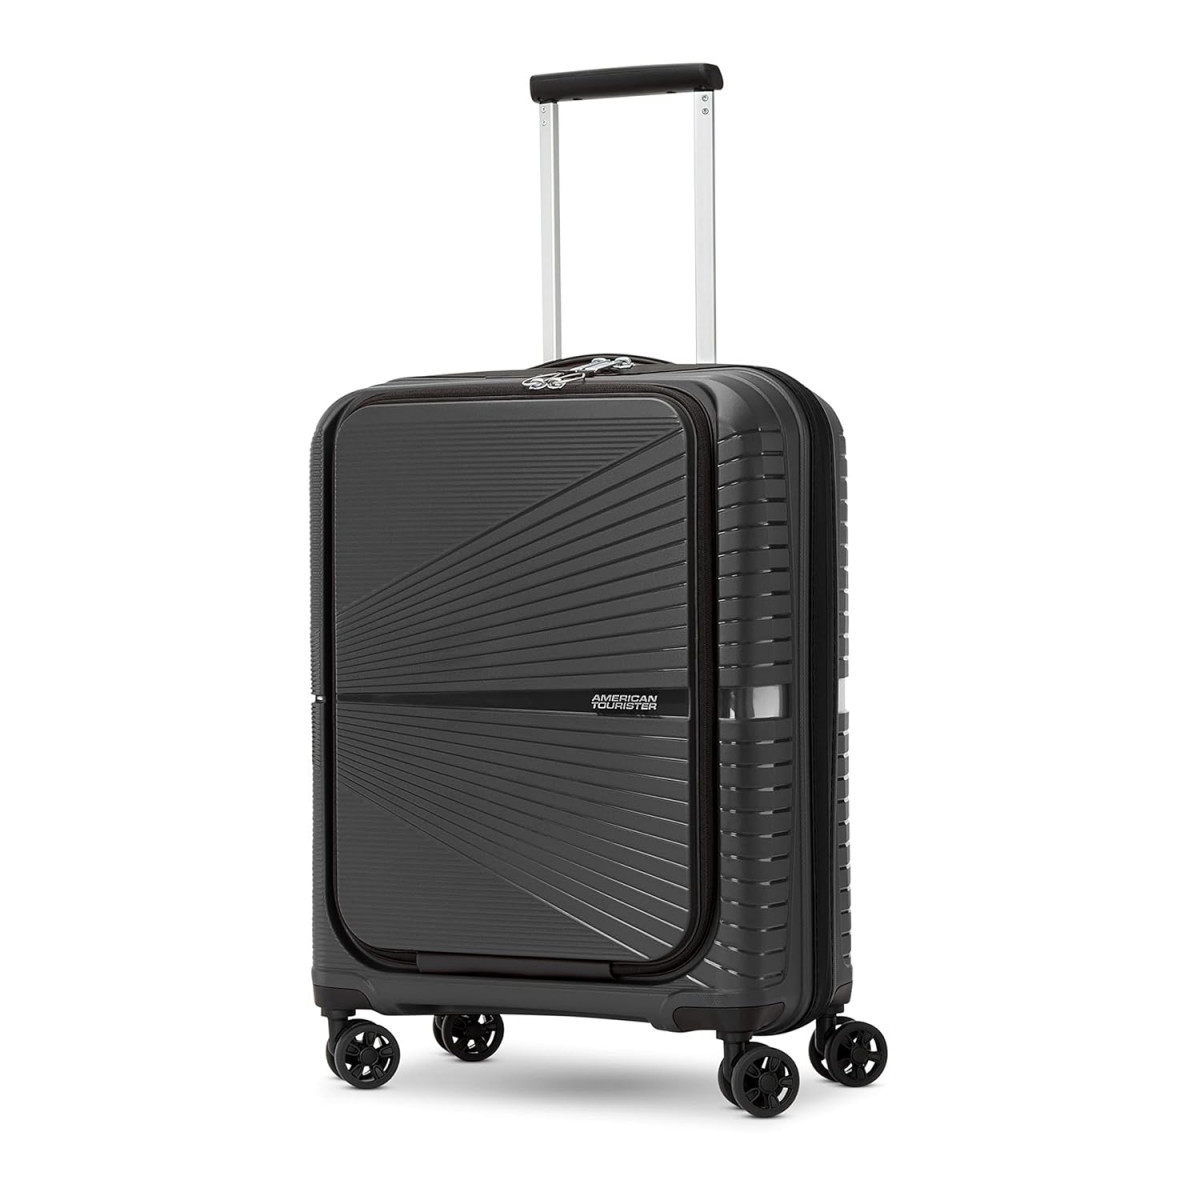 AMERICAN TOURISTER Airconic Hardside Expandable Luggage with Spinner Wheels Graphite Carry-On 21-Inch Airconic Hardside Expandable Luggage With Spinner Wheels